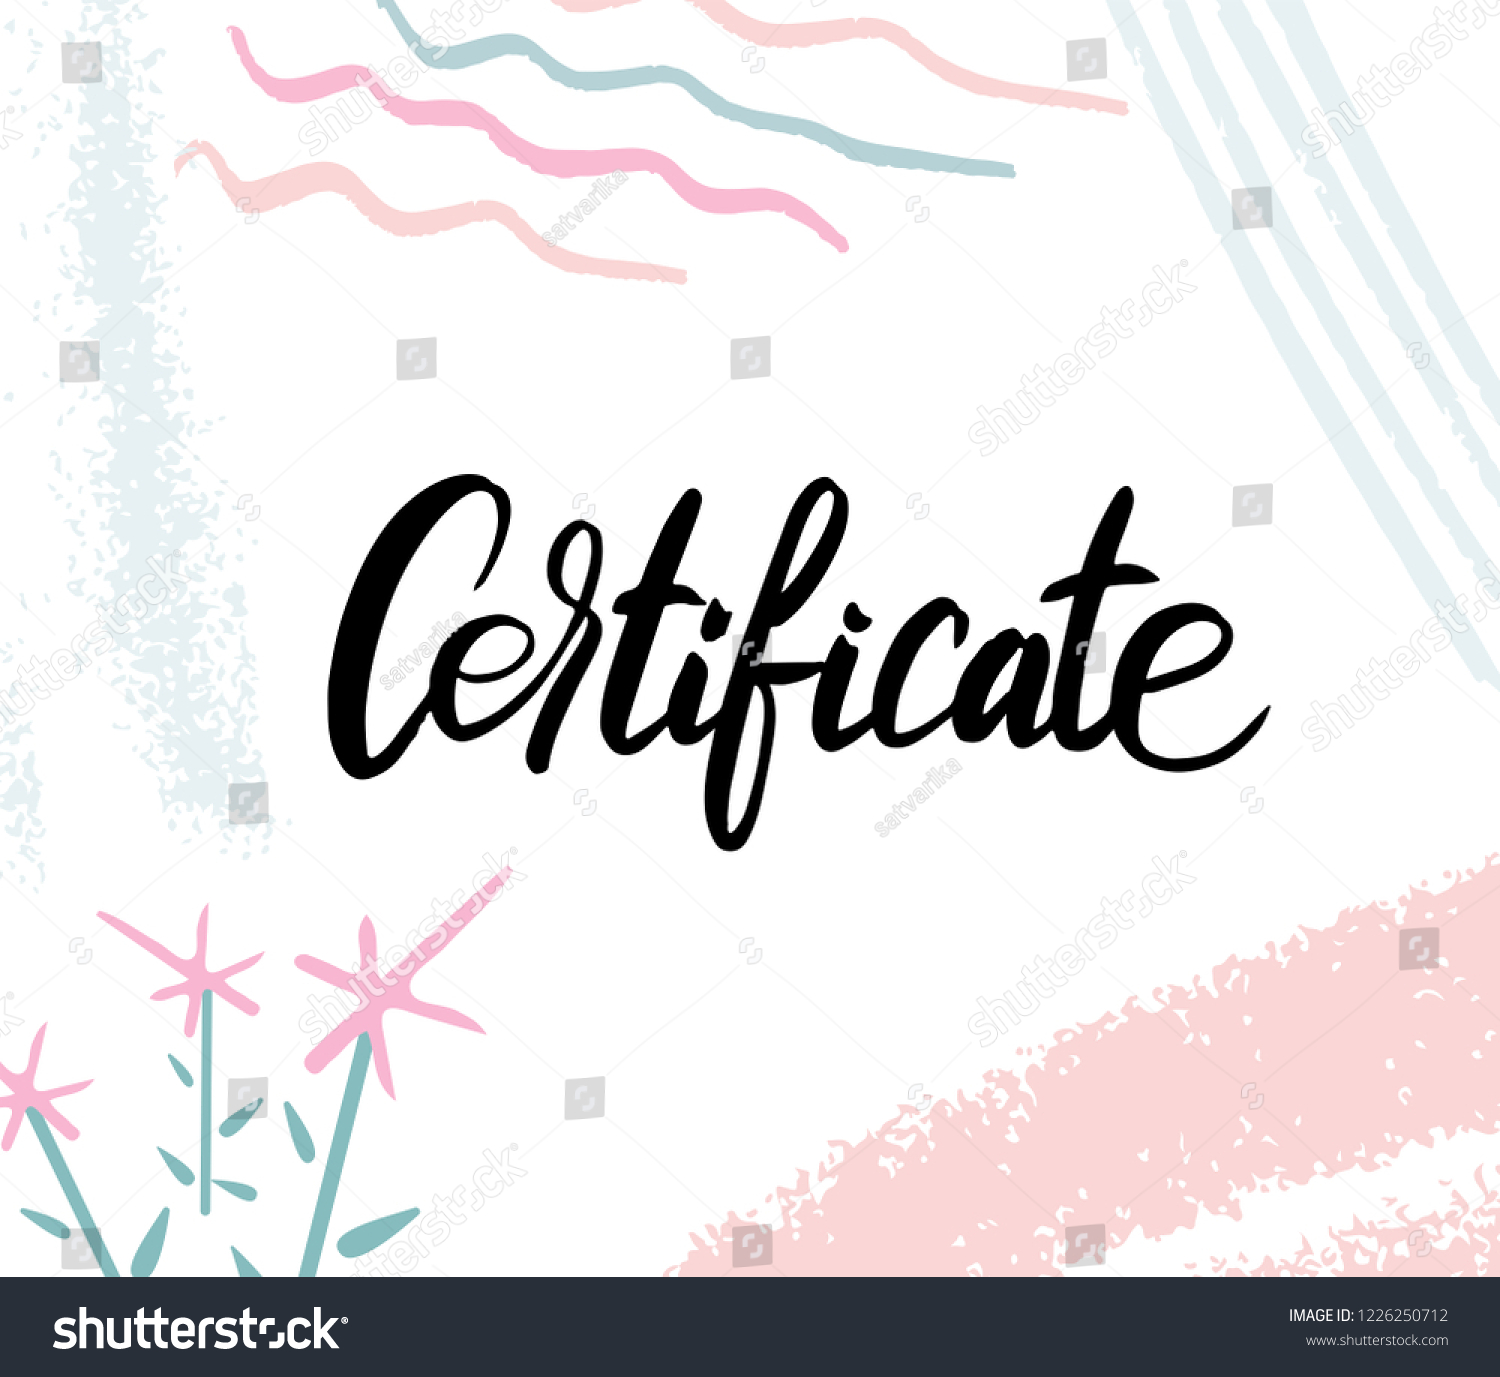 Certificate Hand Writing Word On Background Stock Vector (Royalty